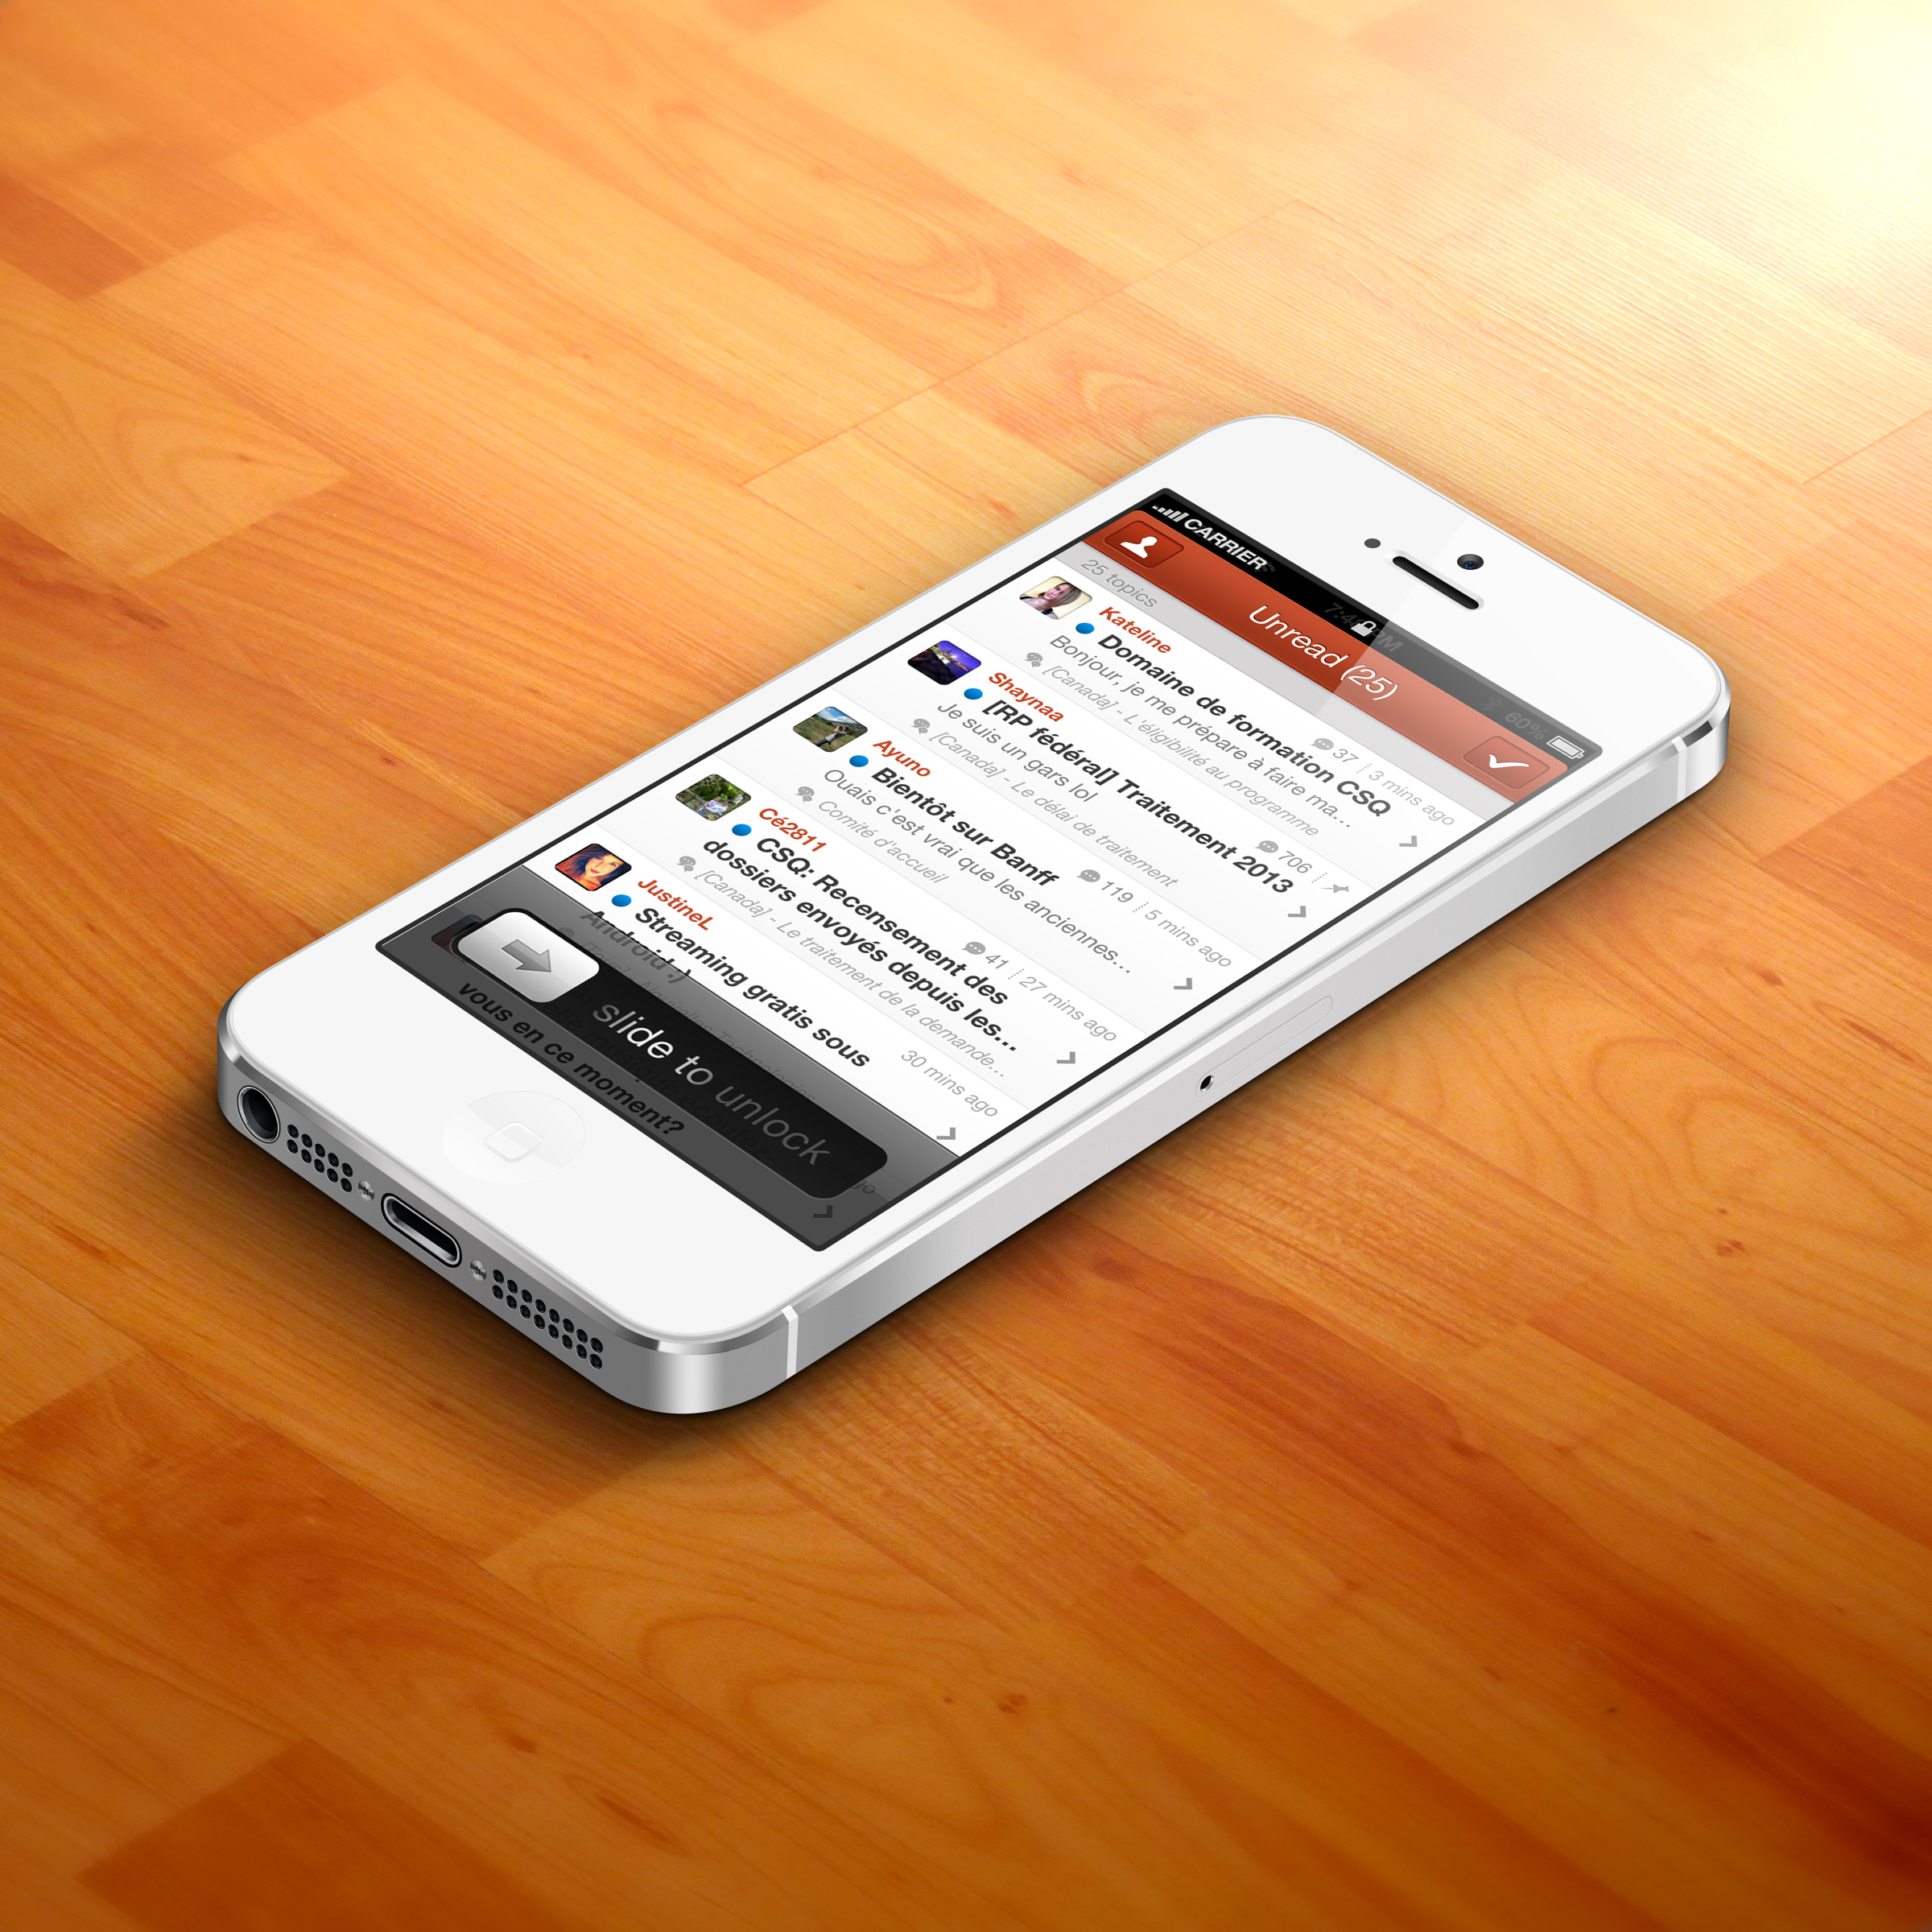 Nom : iPhone-5-White-3D-view-MockUp.jpg
Affichages : 1117
Taille : 2,98 Mo